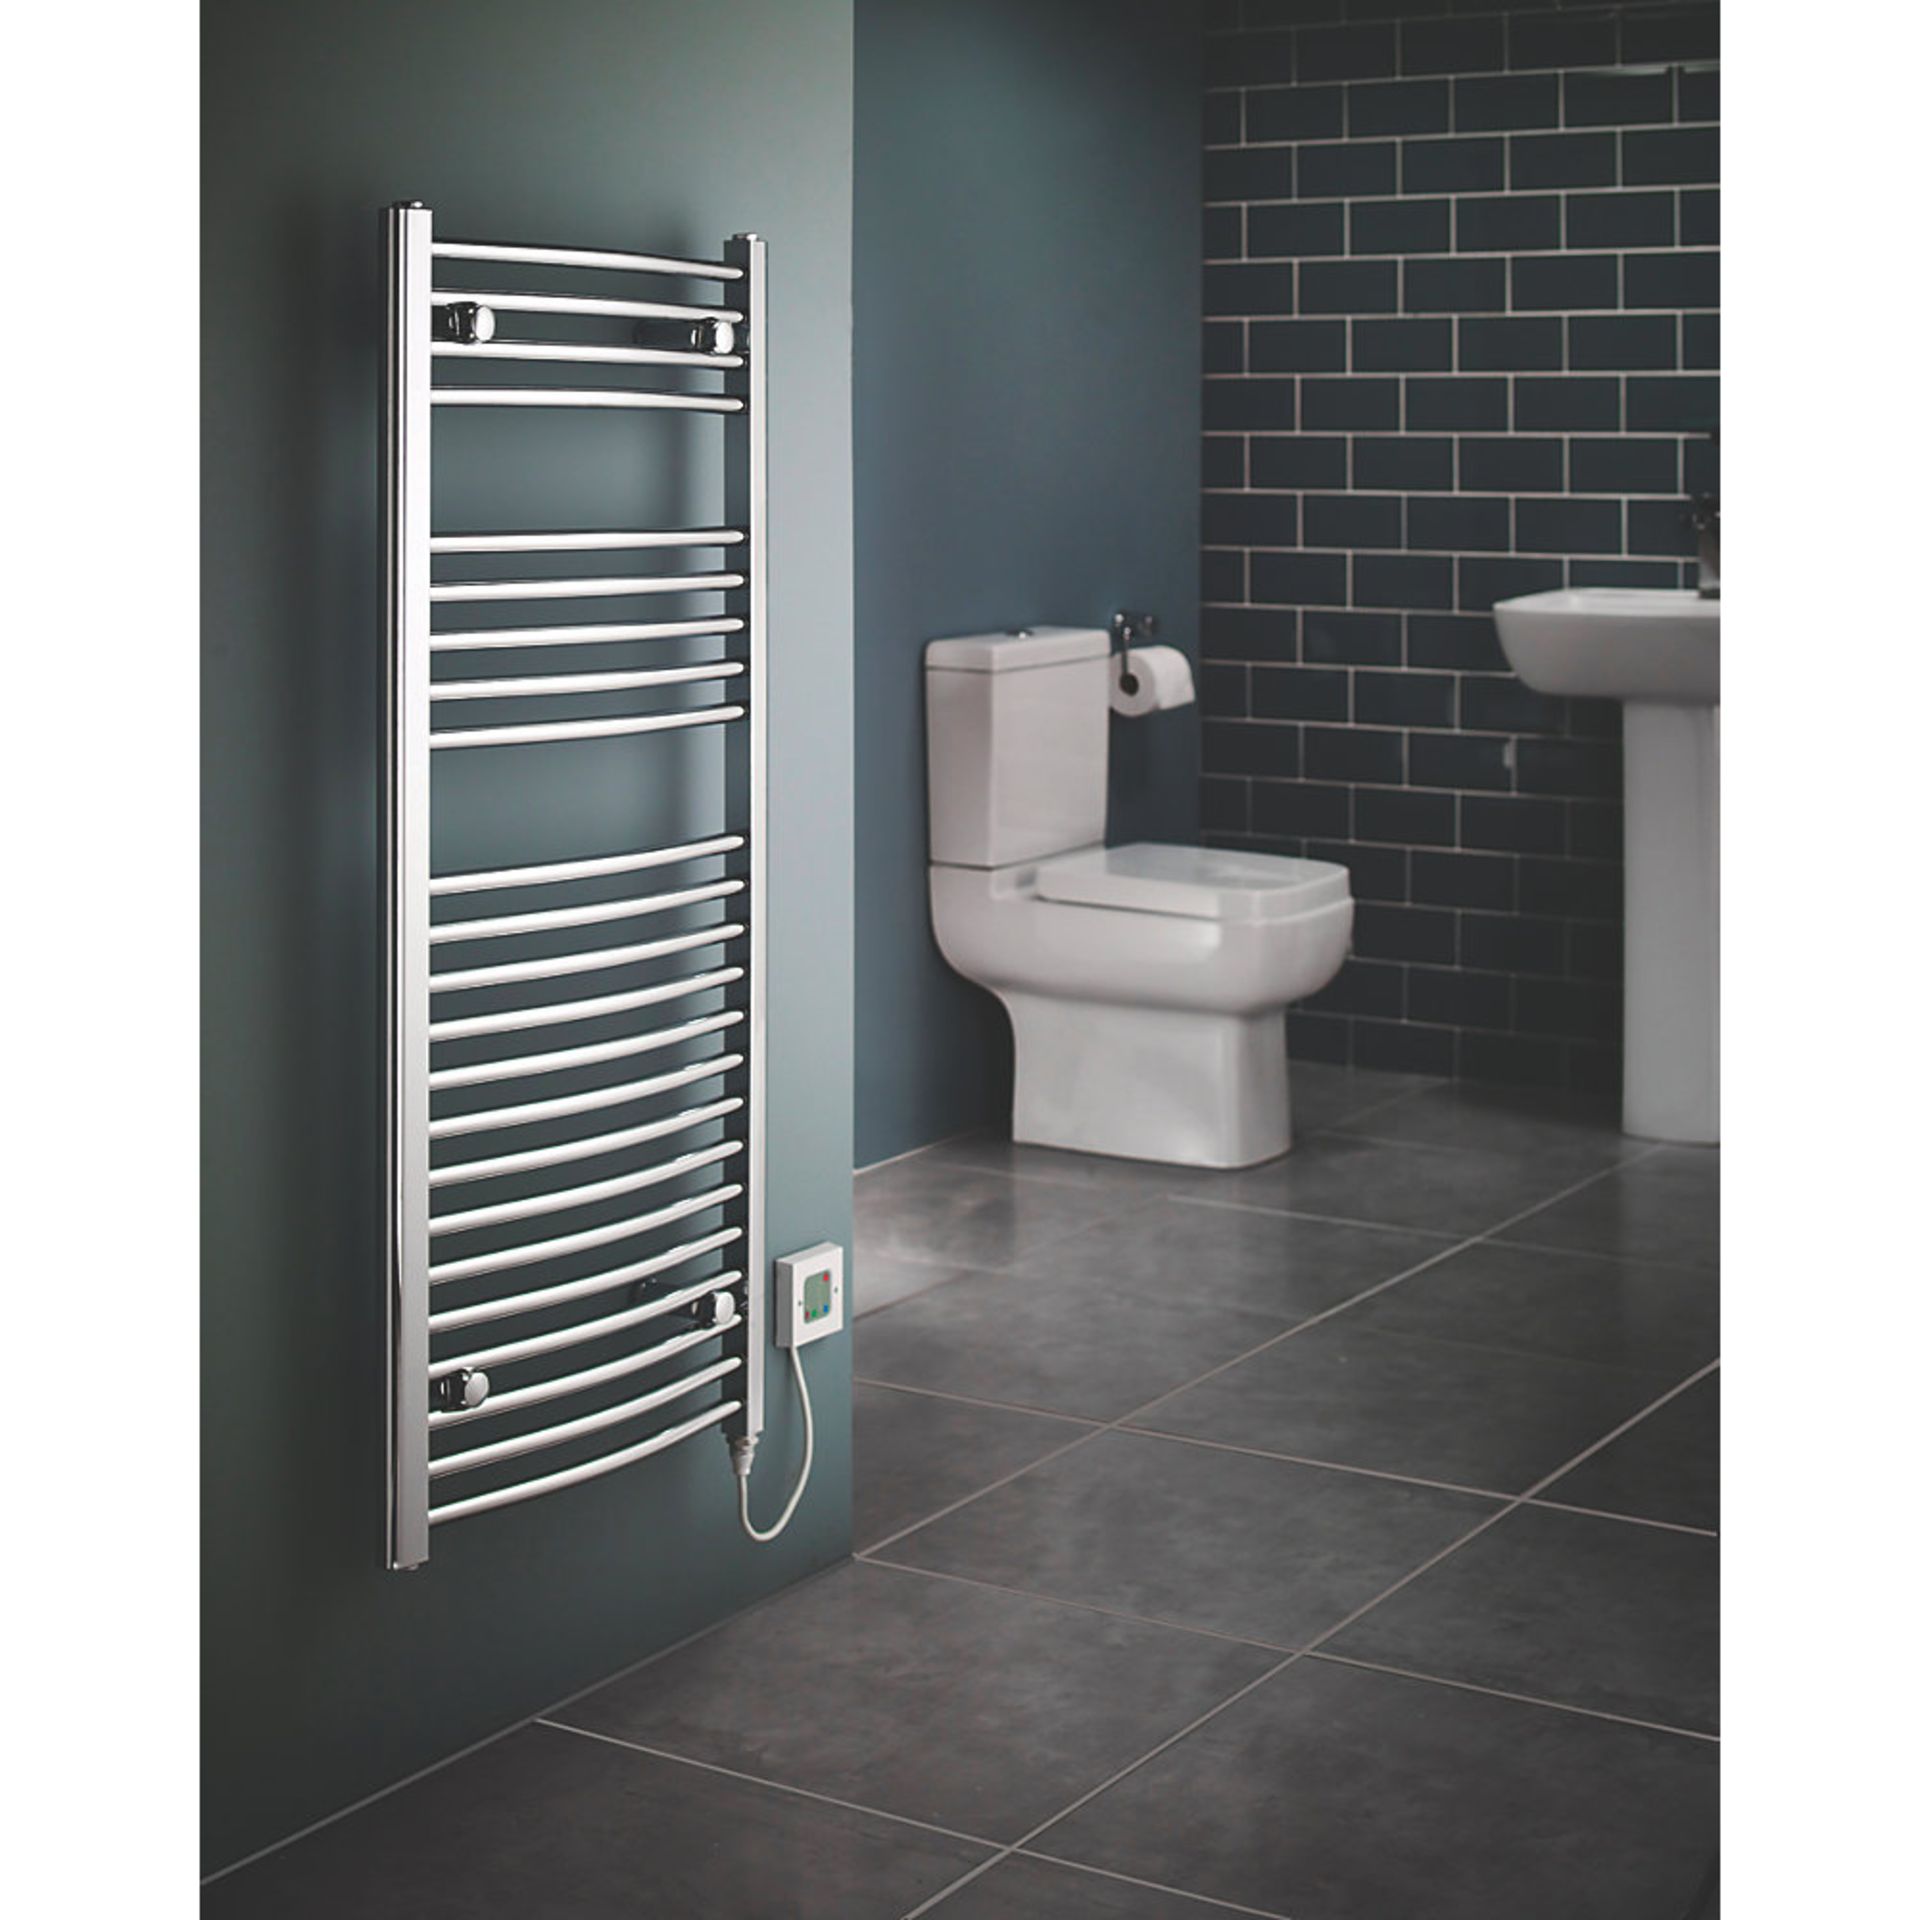 (H34) 1100x500mm FLOMASTA CURVED ELECTRIC TOWEL RADIATOR CHROME. Electrical installation only. ... - Image 2 of 5